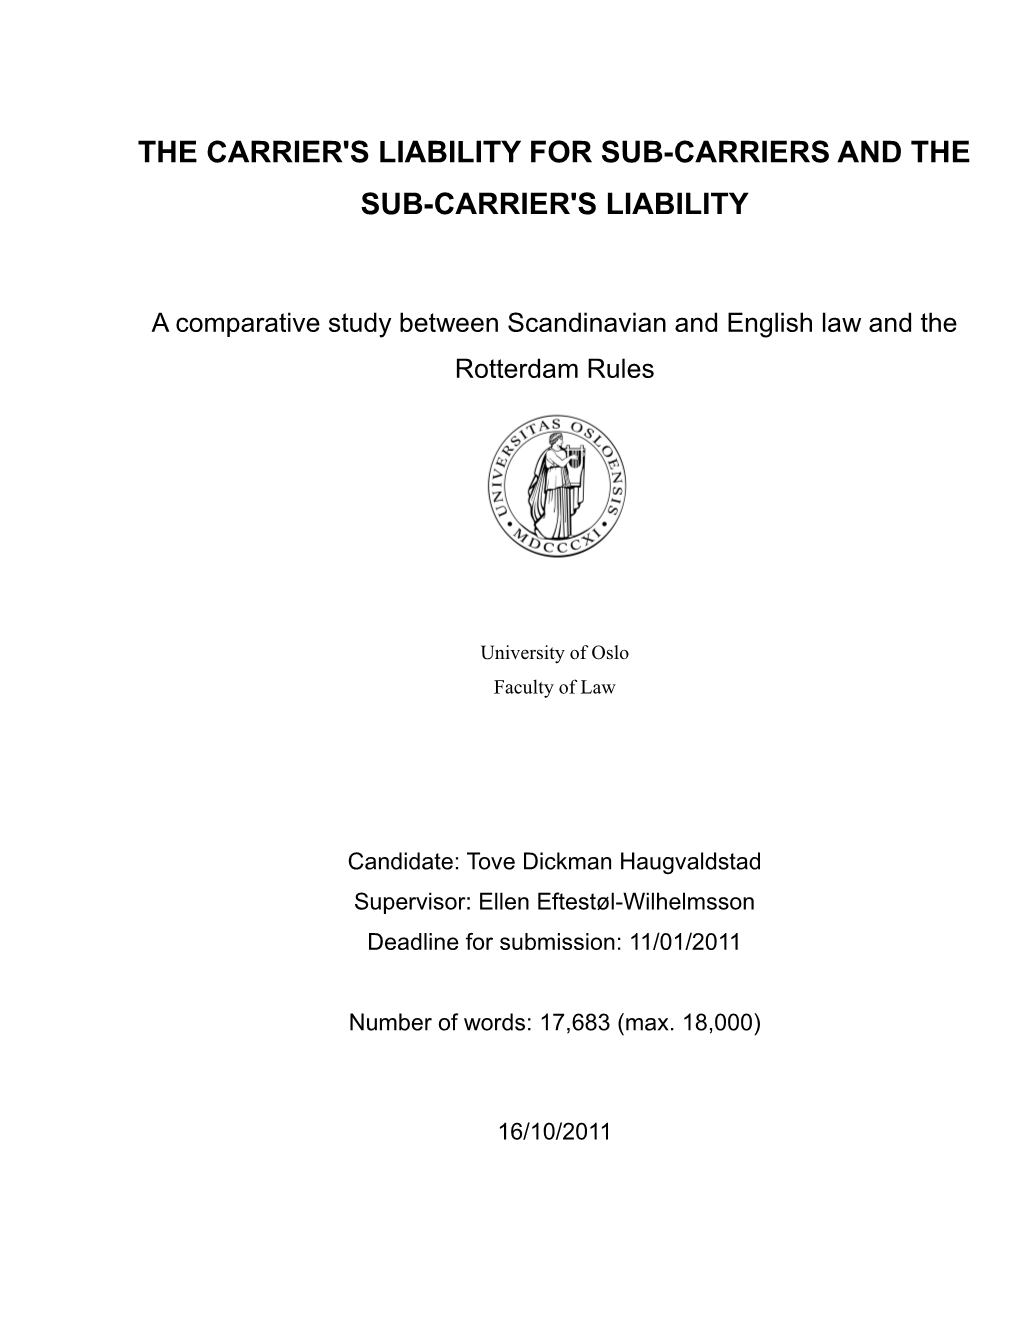 The Carrier's Liability for Sub-Carriers and the Sub-Carrier's Liability